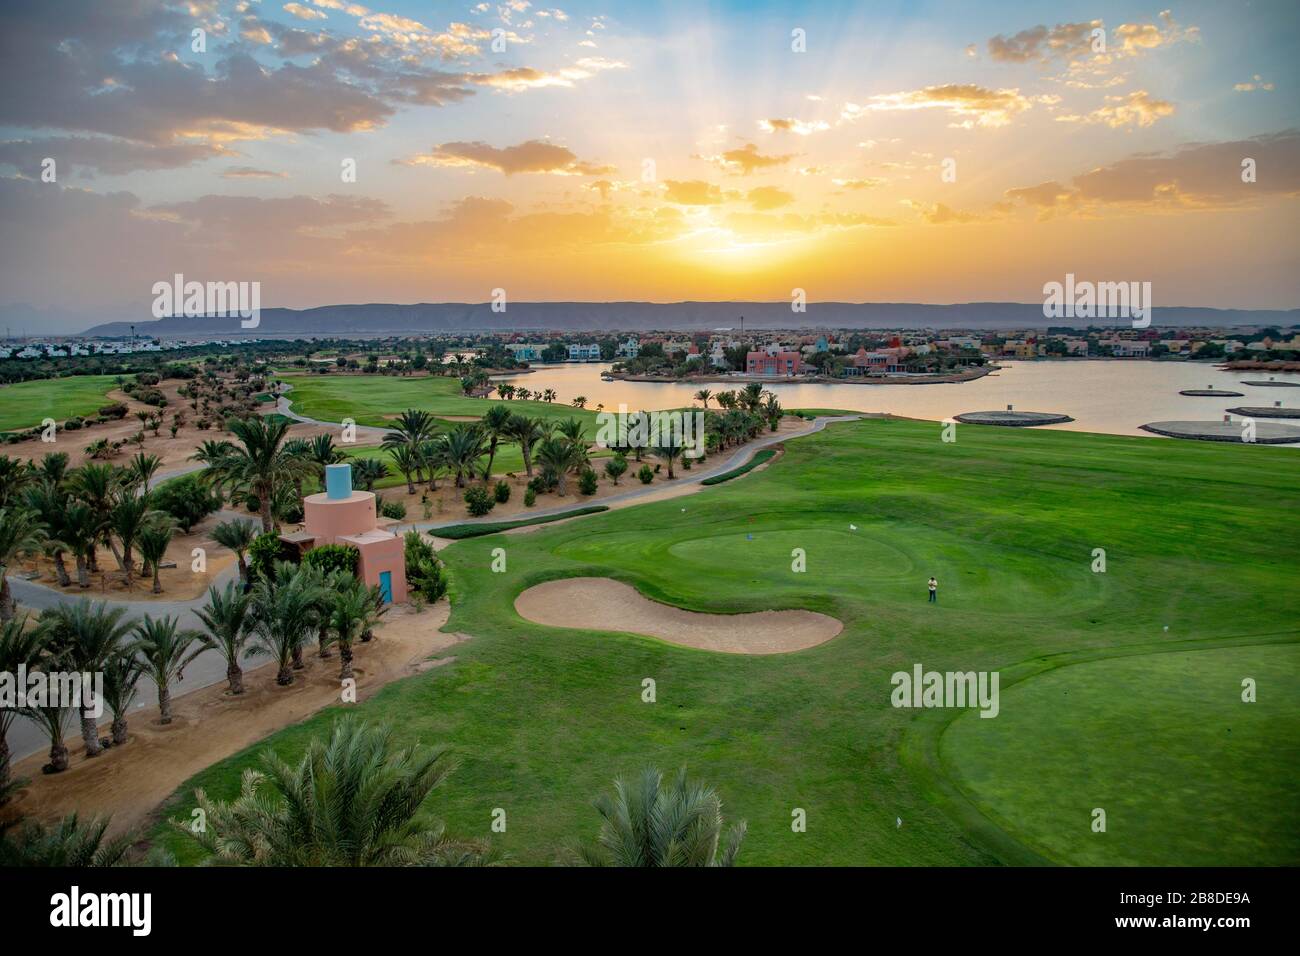 Golf Course Of The Holiday Town El Gouna High Resolution Stock Photography  and Images - Alamy